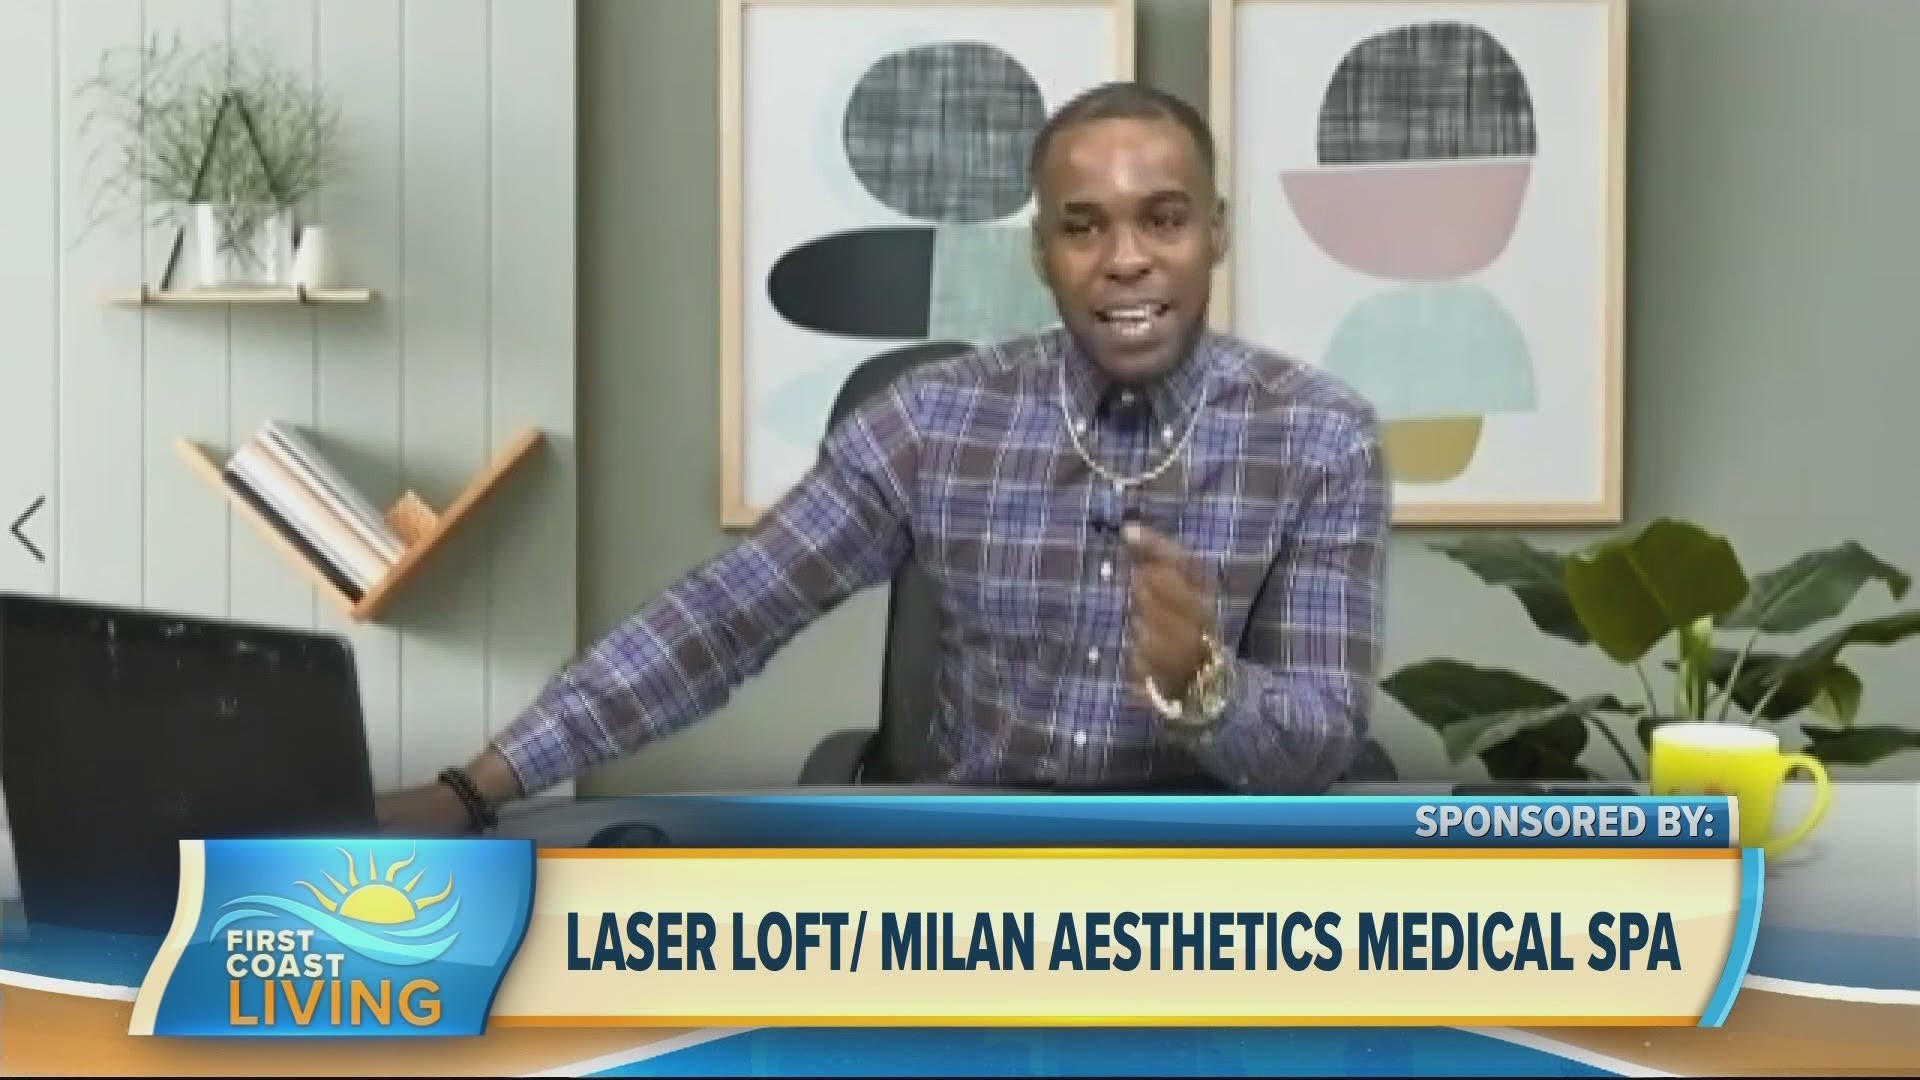 Treatment offered at Laser Loft and Milan Aesthetics Medical Spa.